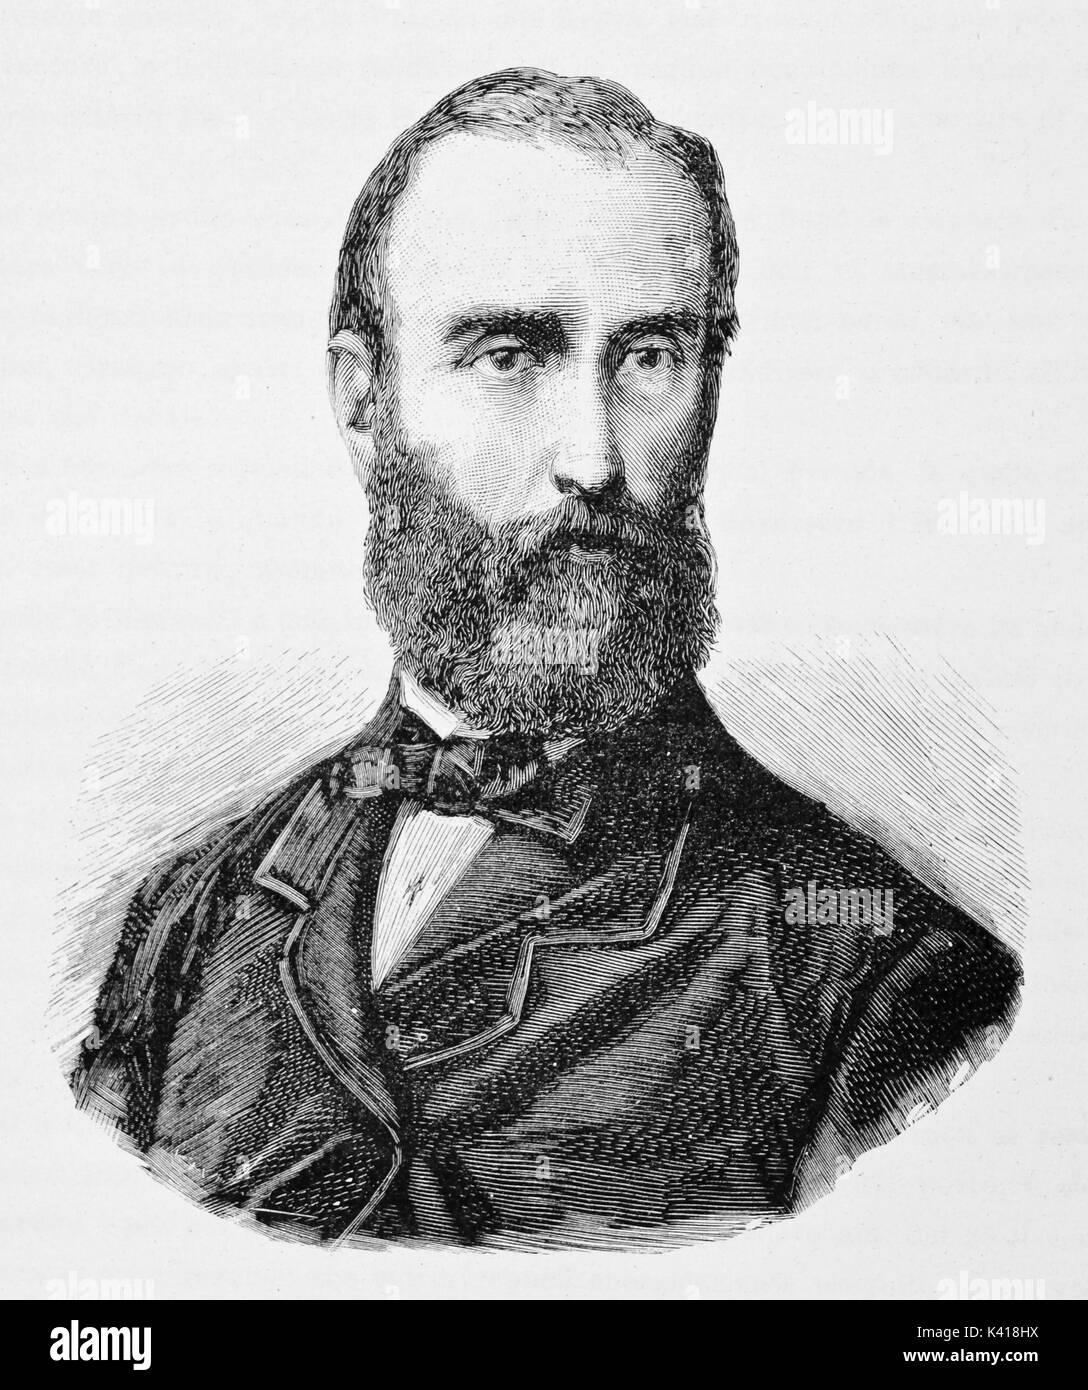 Ancient elegant man with long beard and receding hairline. Cool dressing style and tie bow. Aurelio Saffi (1819 - 1890). By E. Matania published on Garibaldi e i Suoi Tempi Milan Italy 1884 Stock Photo